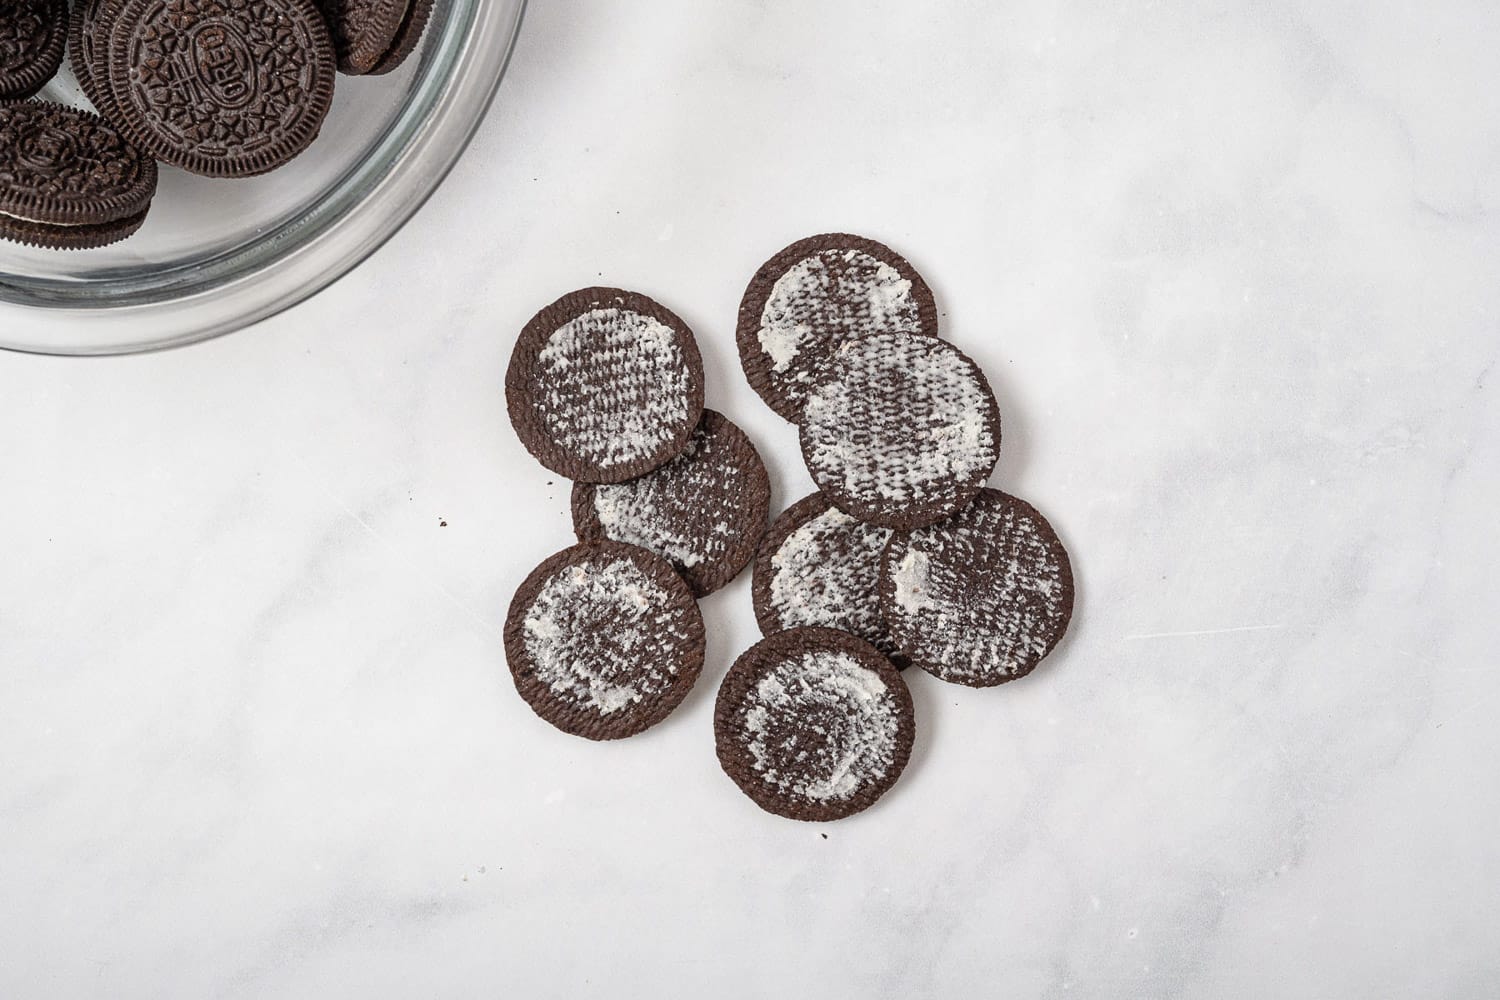 Oreo cookies with the filling removed